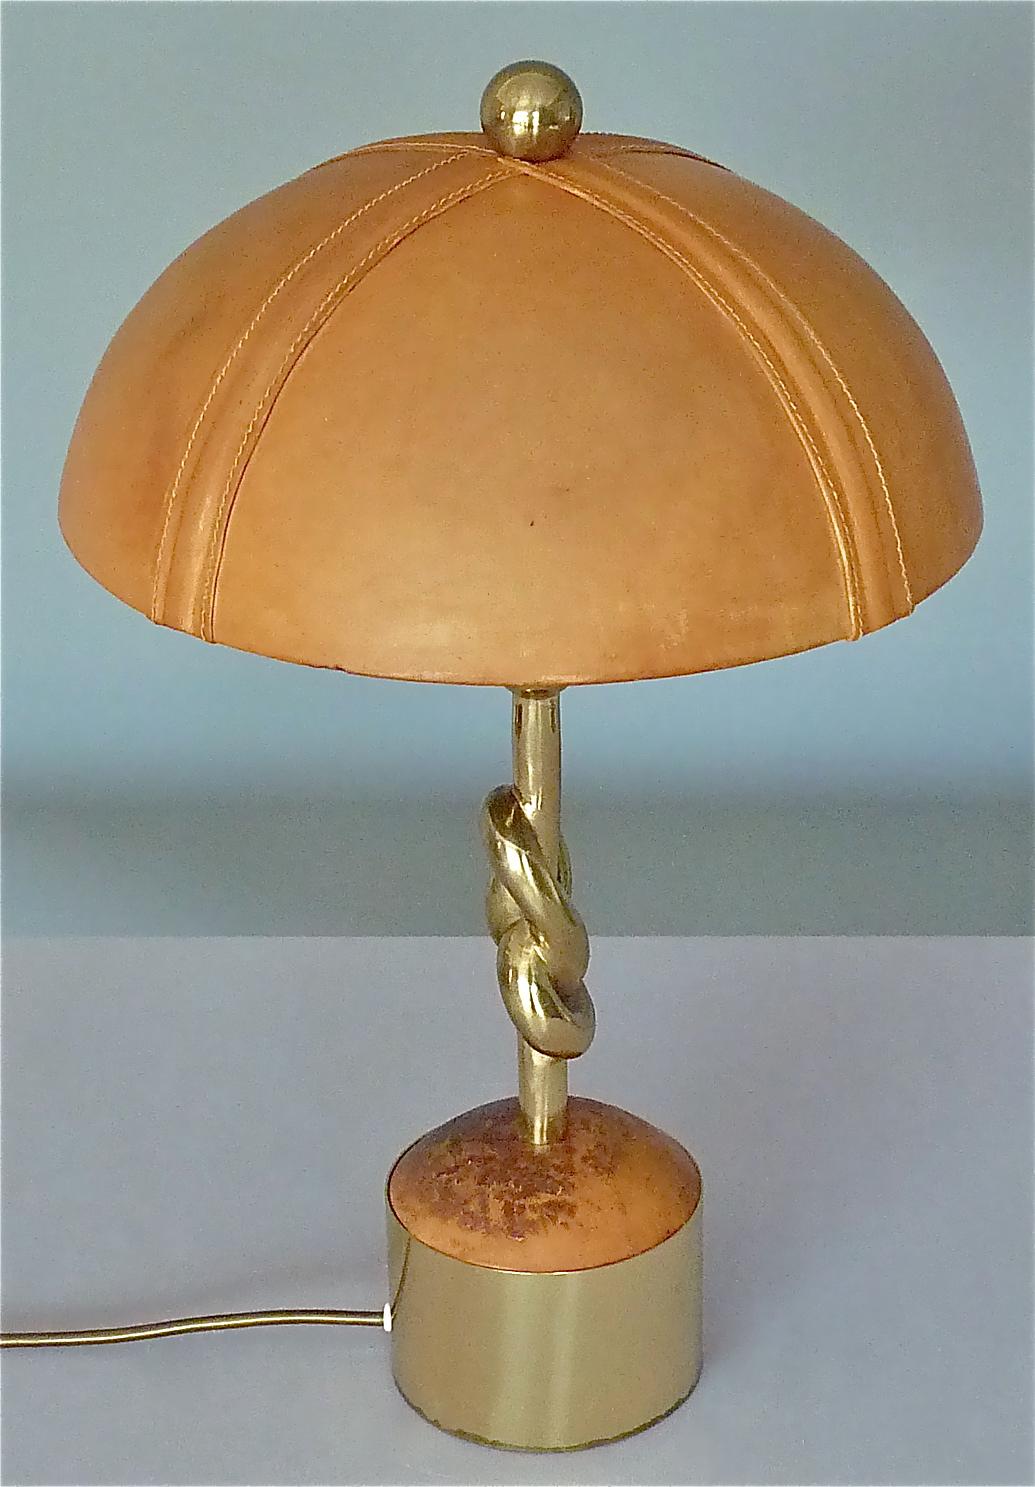 Sculptural Gilt Bronze Leather Knotted Table Lamp French 1970s Jansen Pergay Era For Sale 11